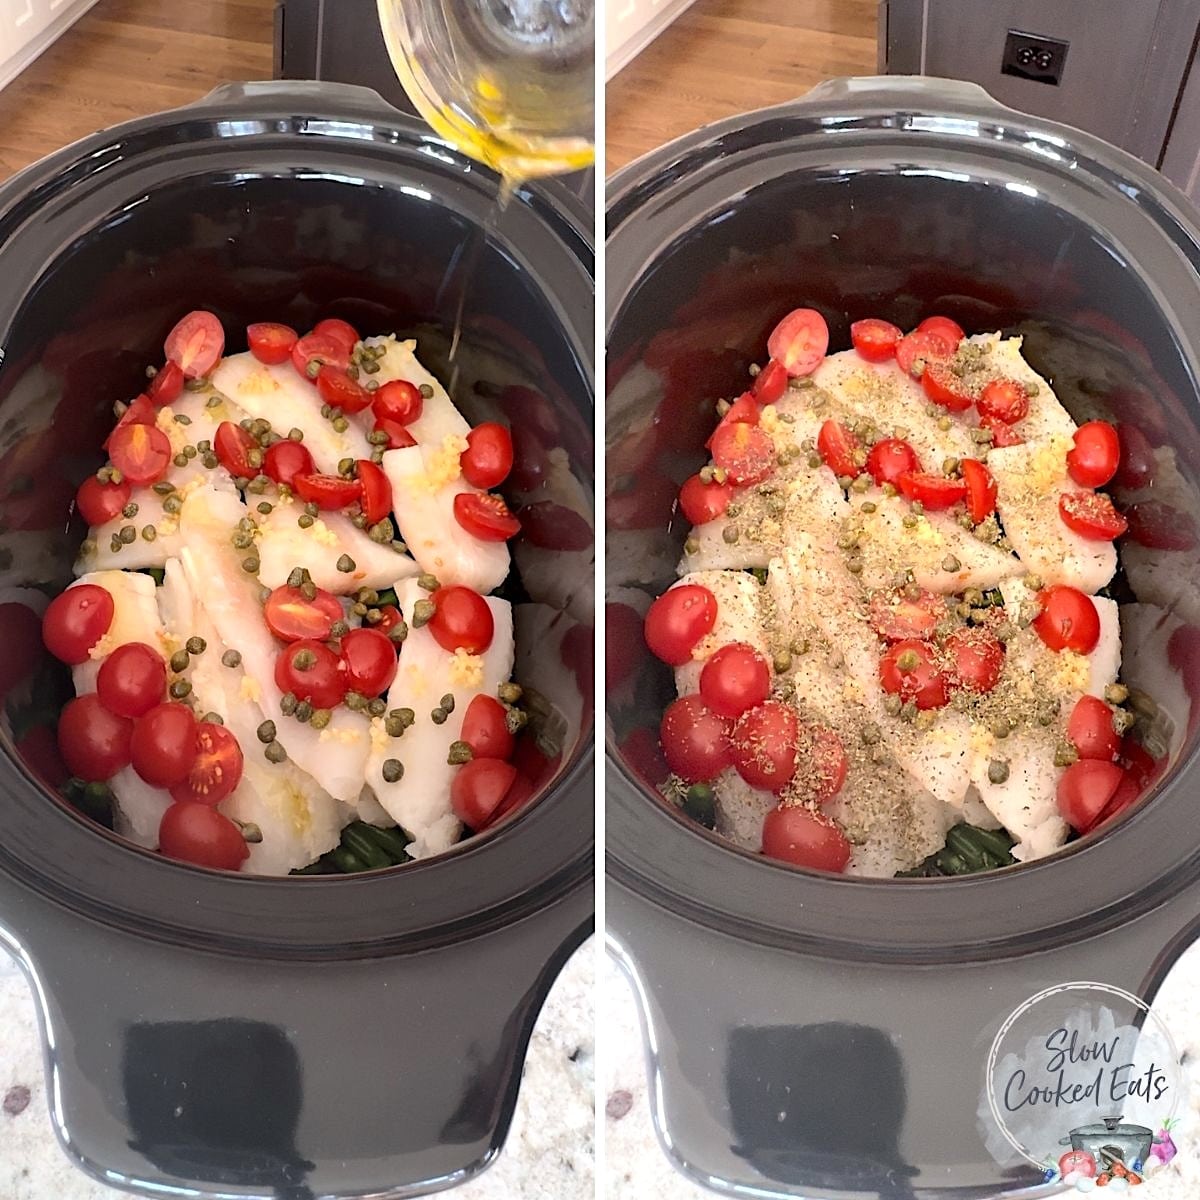 Drizzling seasoning and oil over crockpot cod.